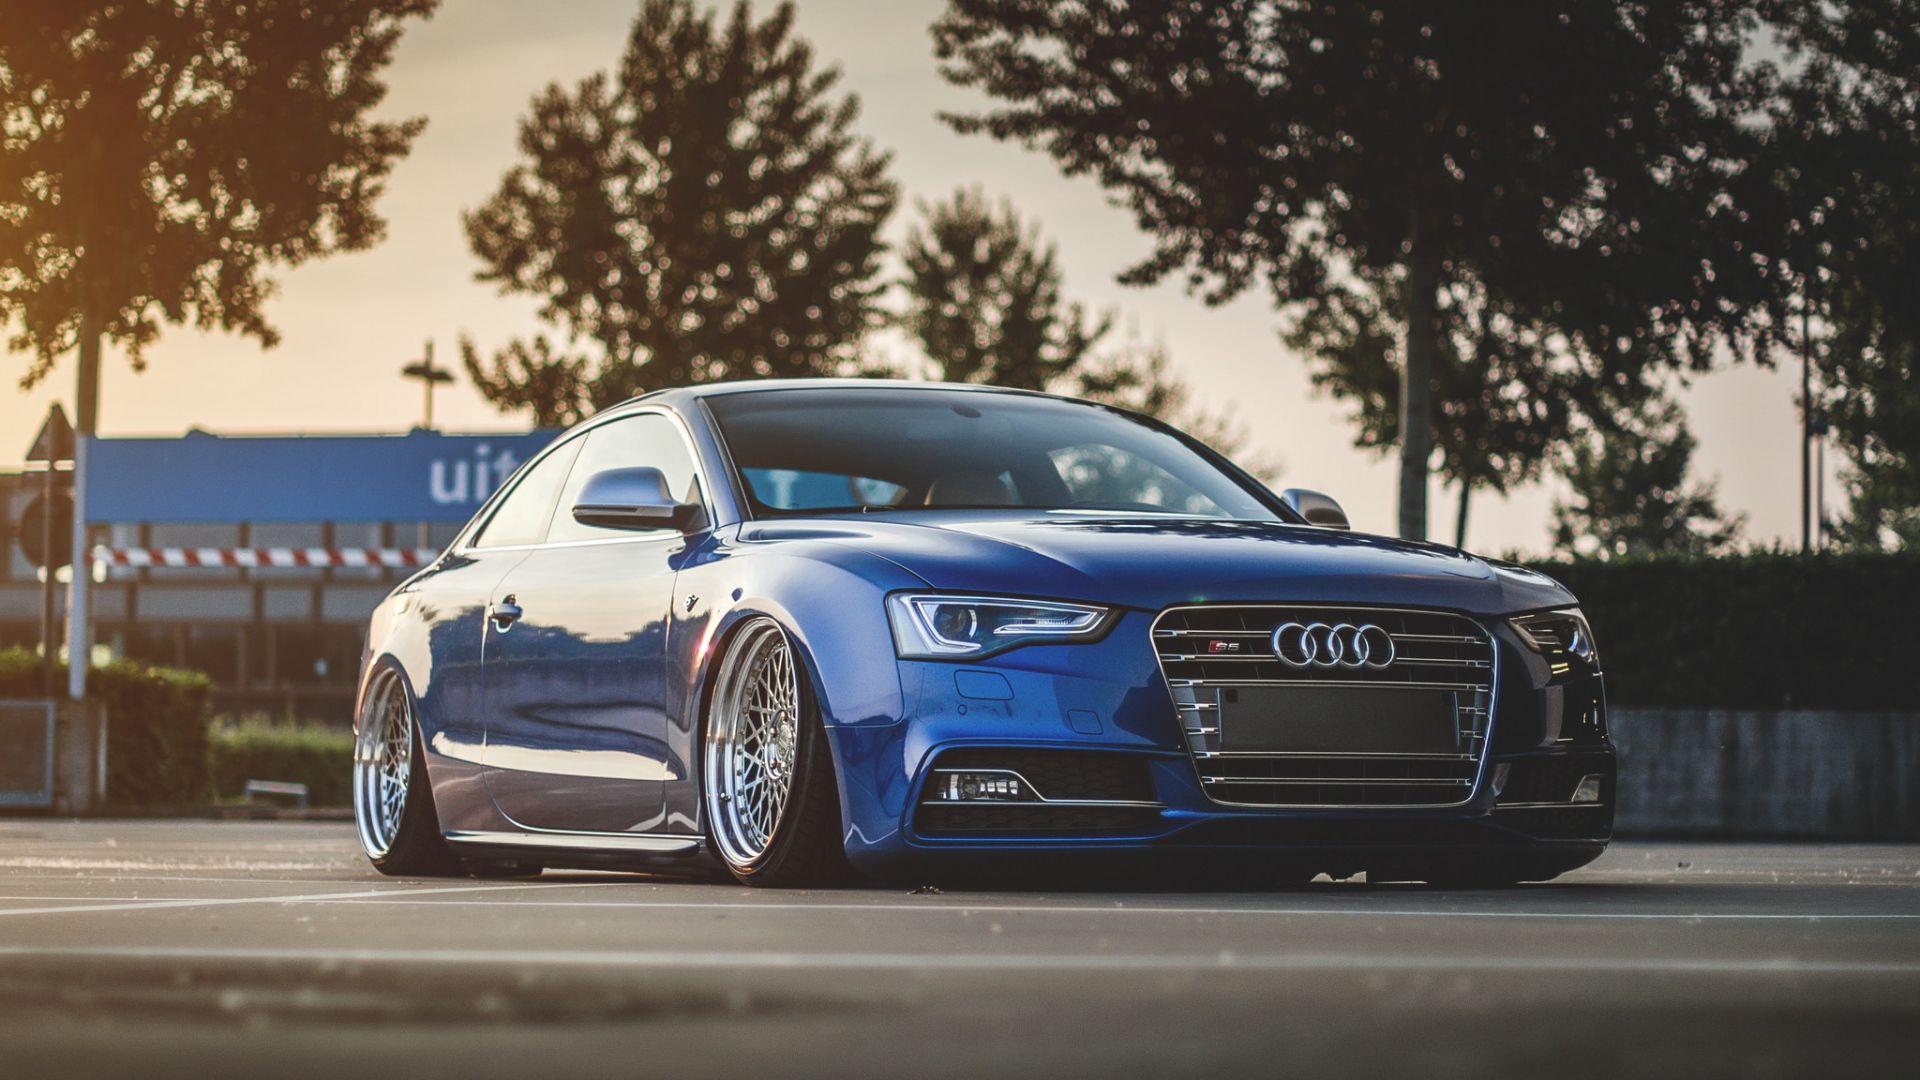 Audi wallpaper, car wallpaper and background. bestapppromotion